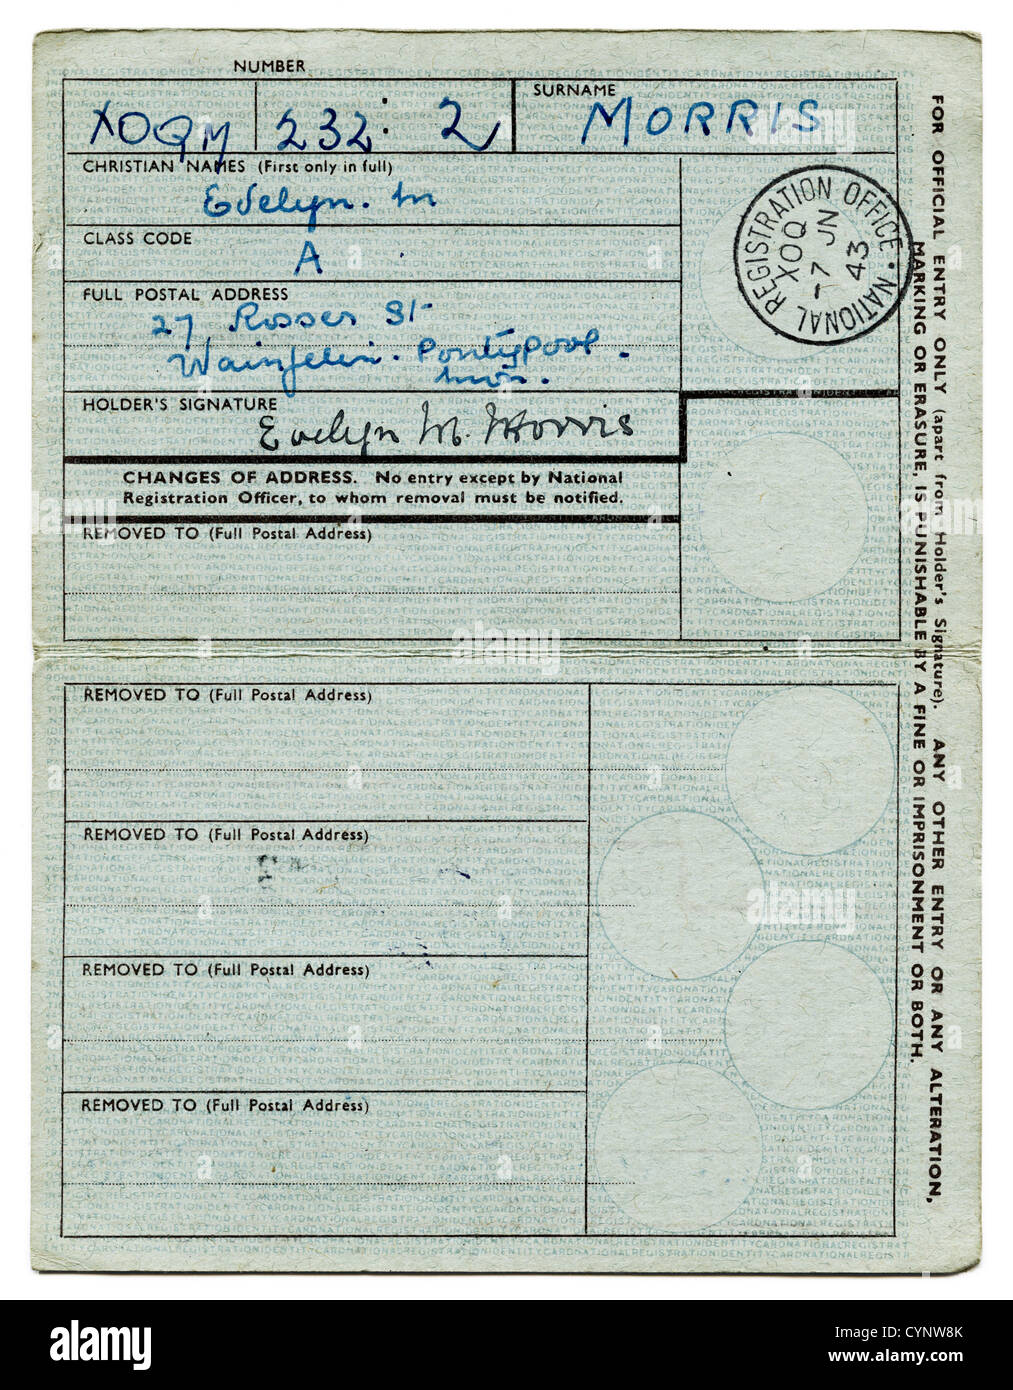 Inside pages of National Registration Identity Card from World War II circa 1943 Stock Photo